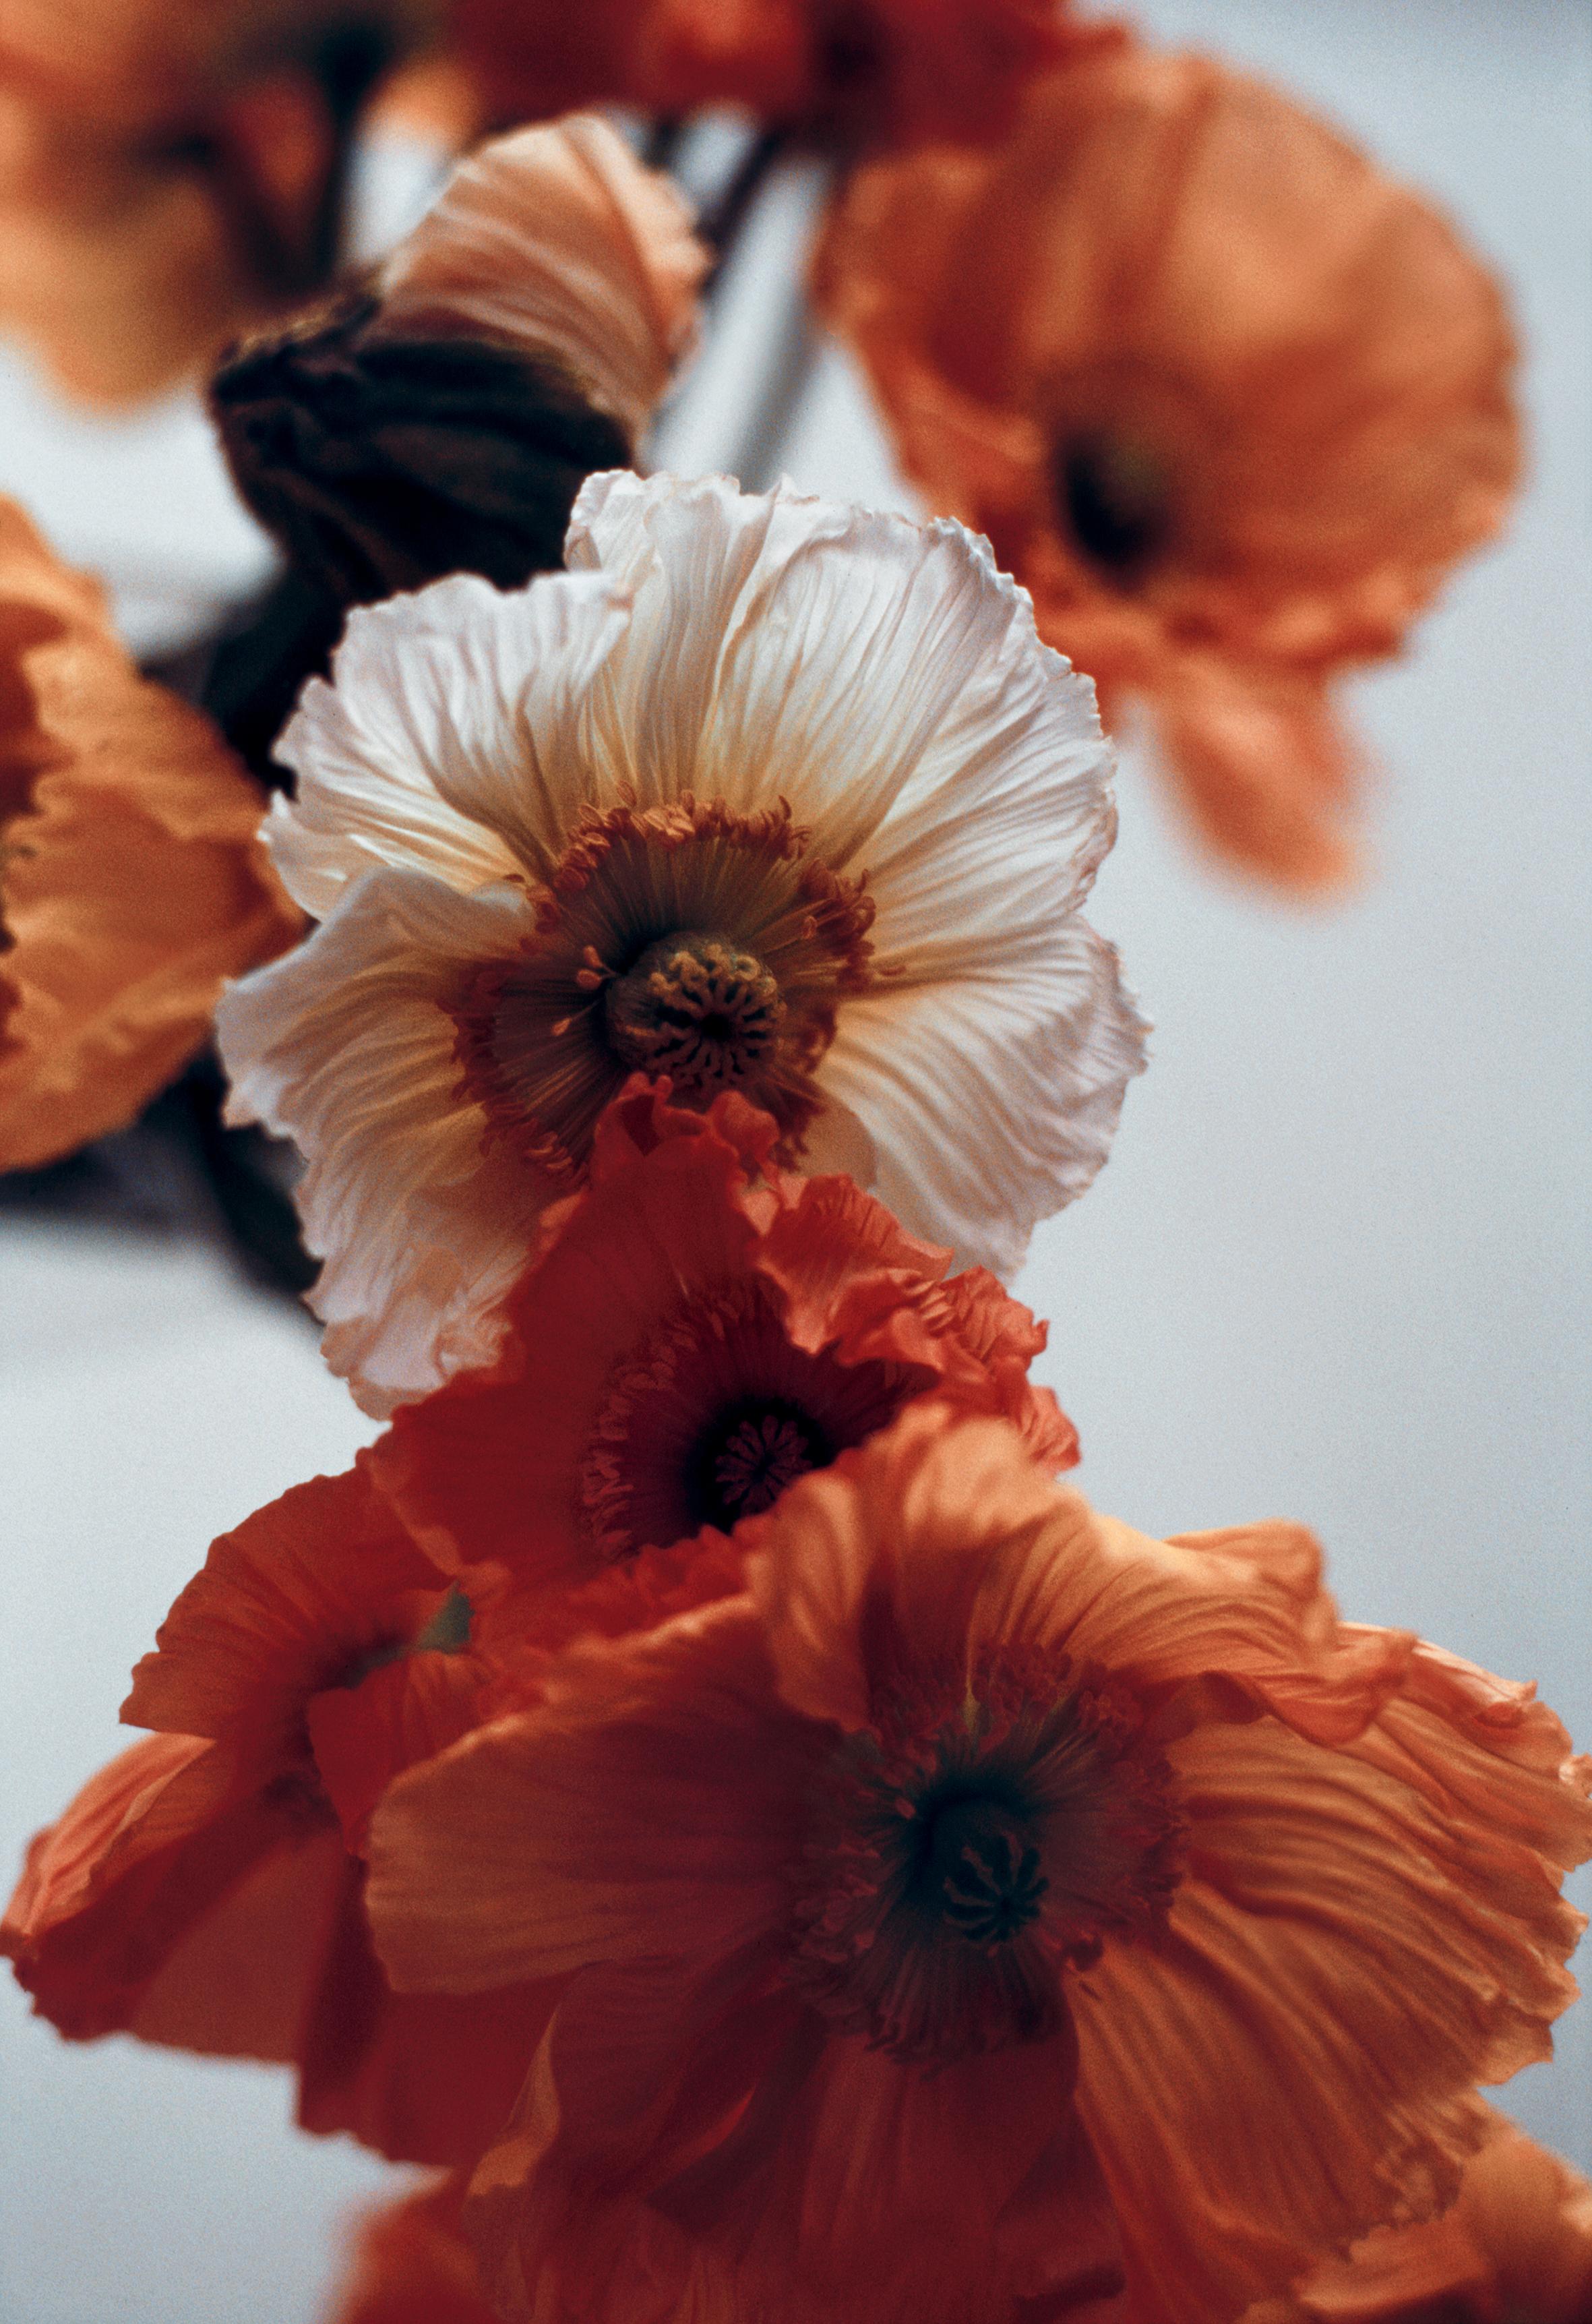 Ugne Pouwell Color Photograph - Orange Poppies No.4 - Analogue floral photography, Limited edition of 20